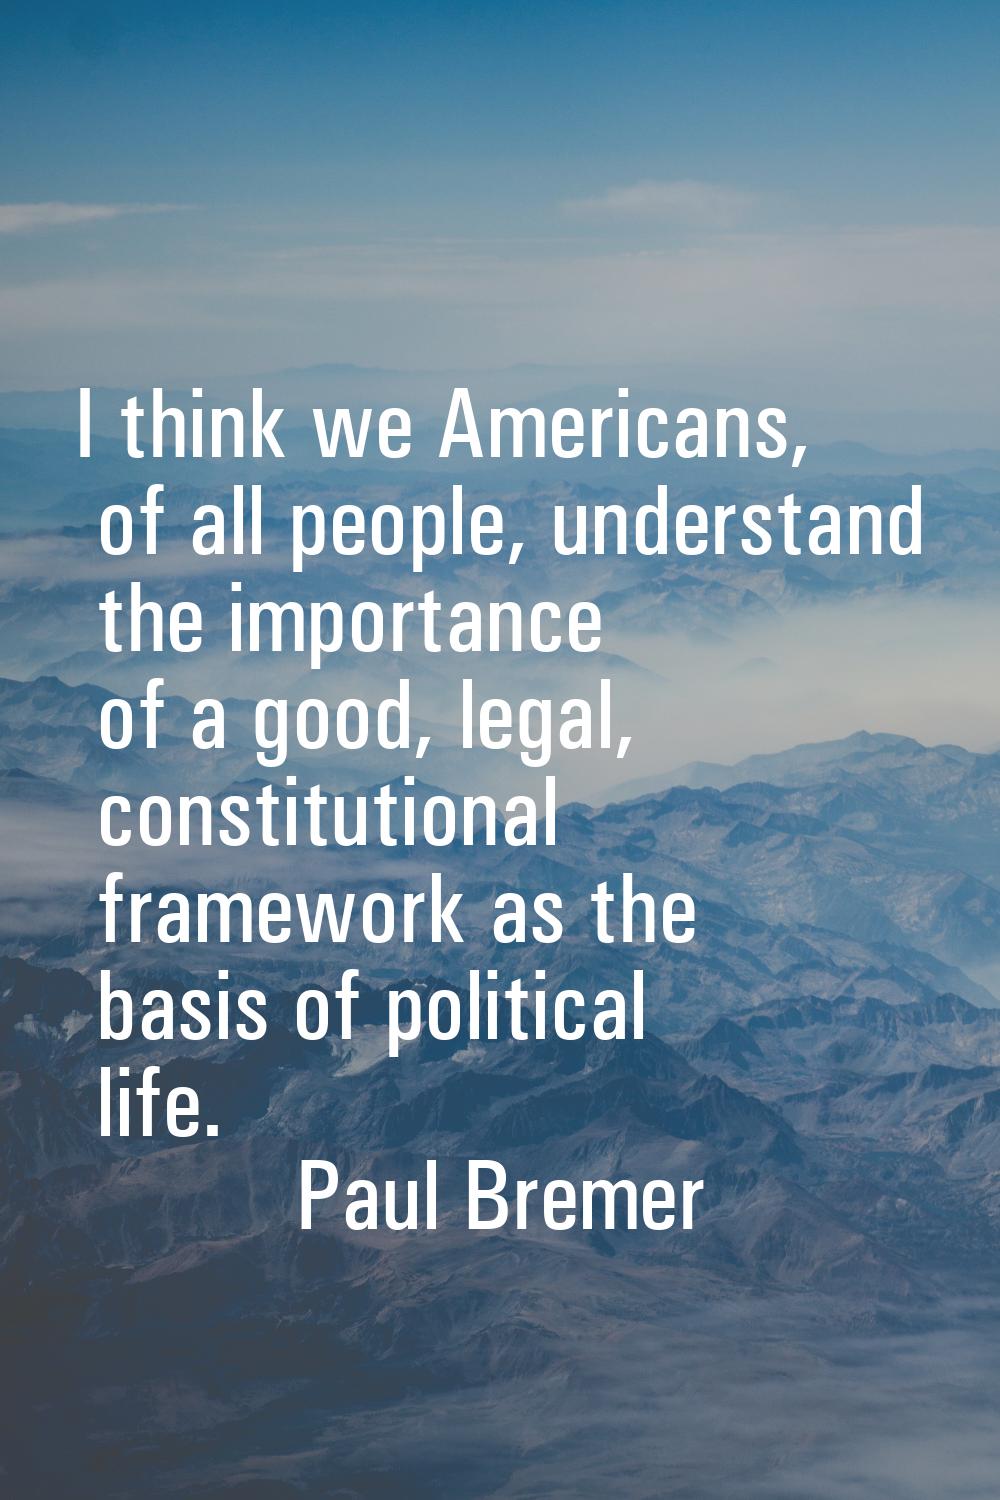 I think we Americans, of all people, understand the importance of a good, legal, constitutional fra